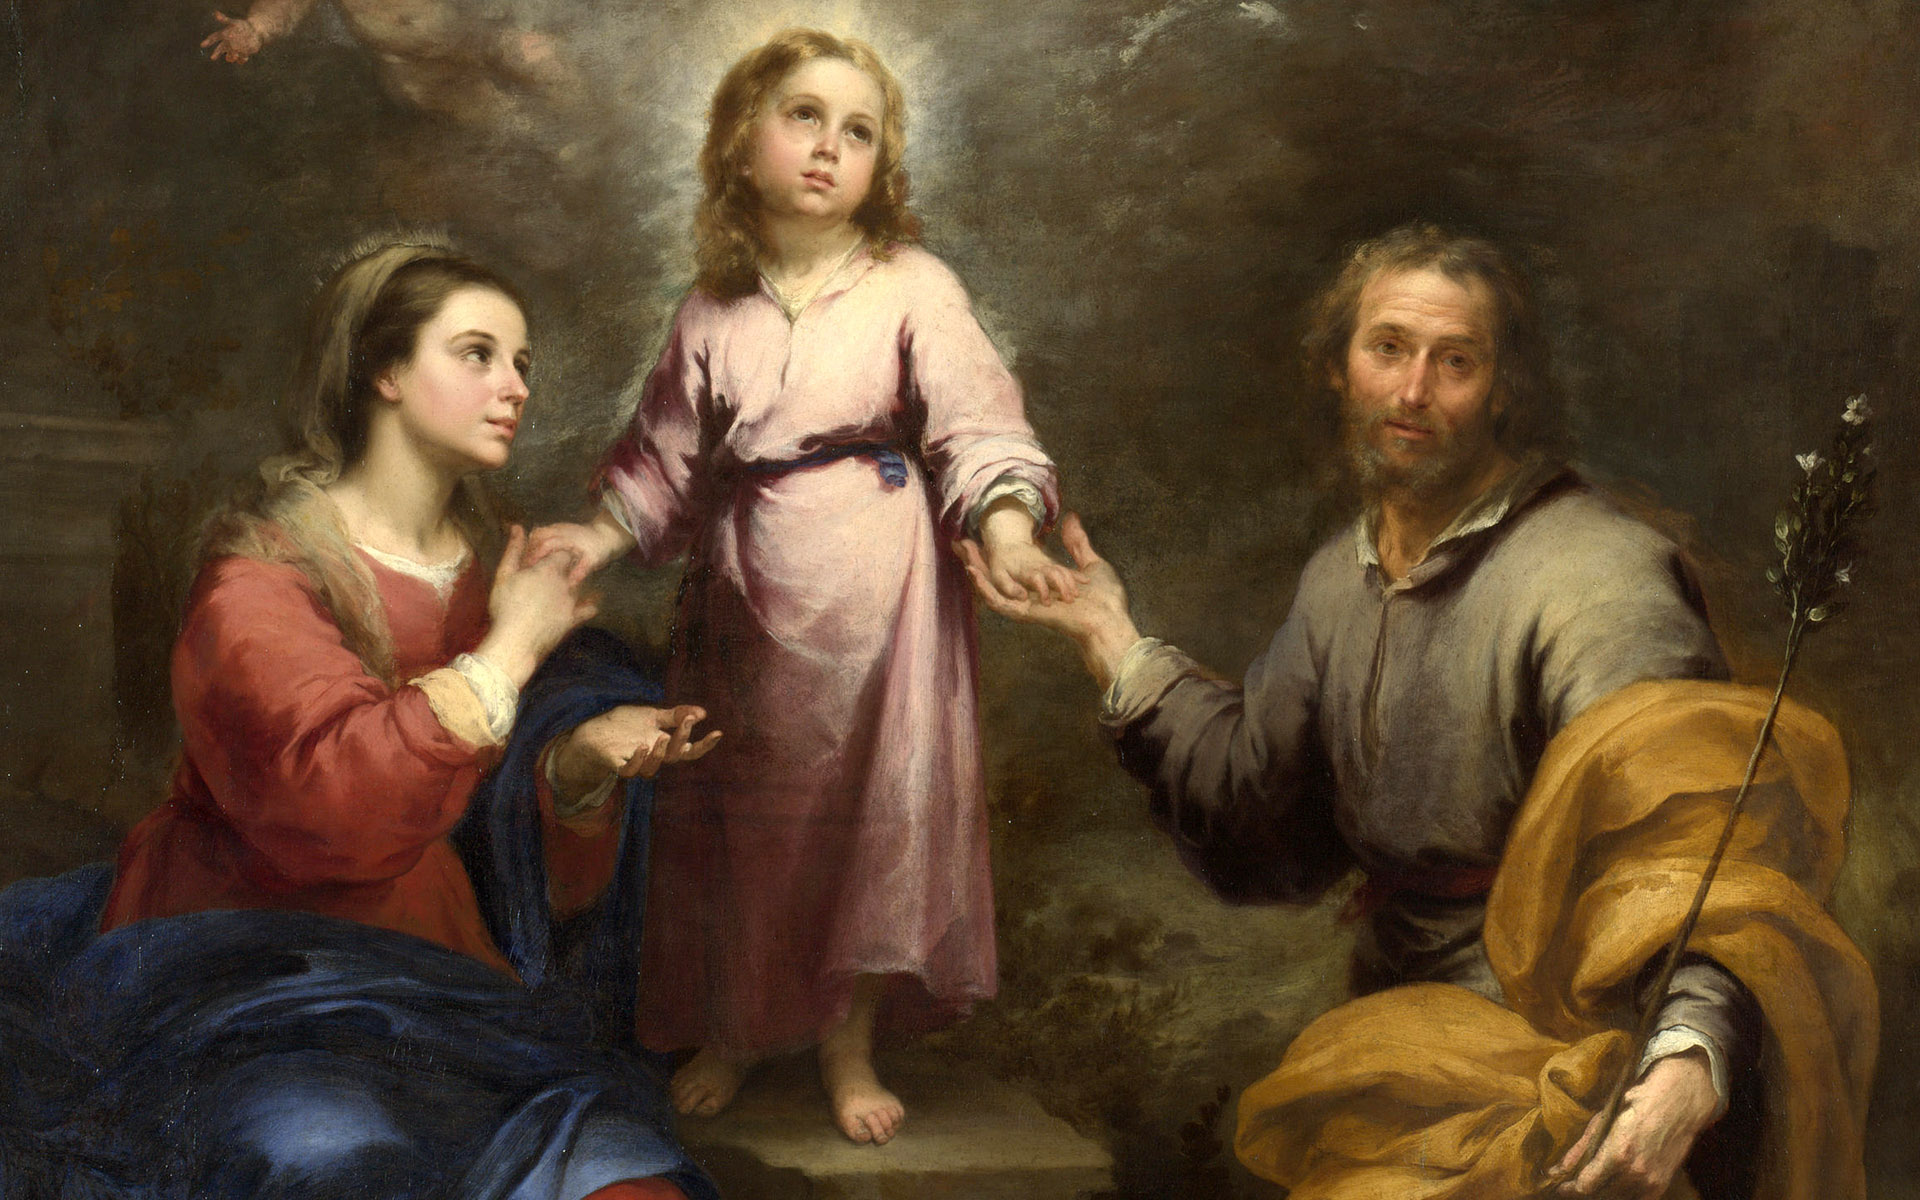 The Heavenly and Earthly Trinities by Bartolome Esteban Murillo